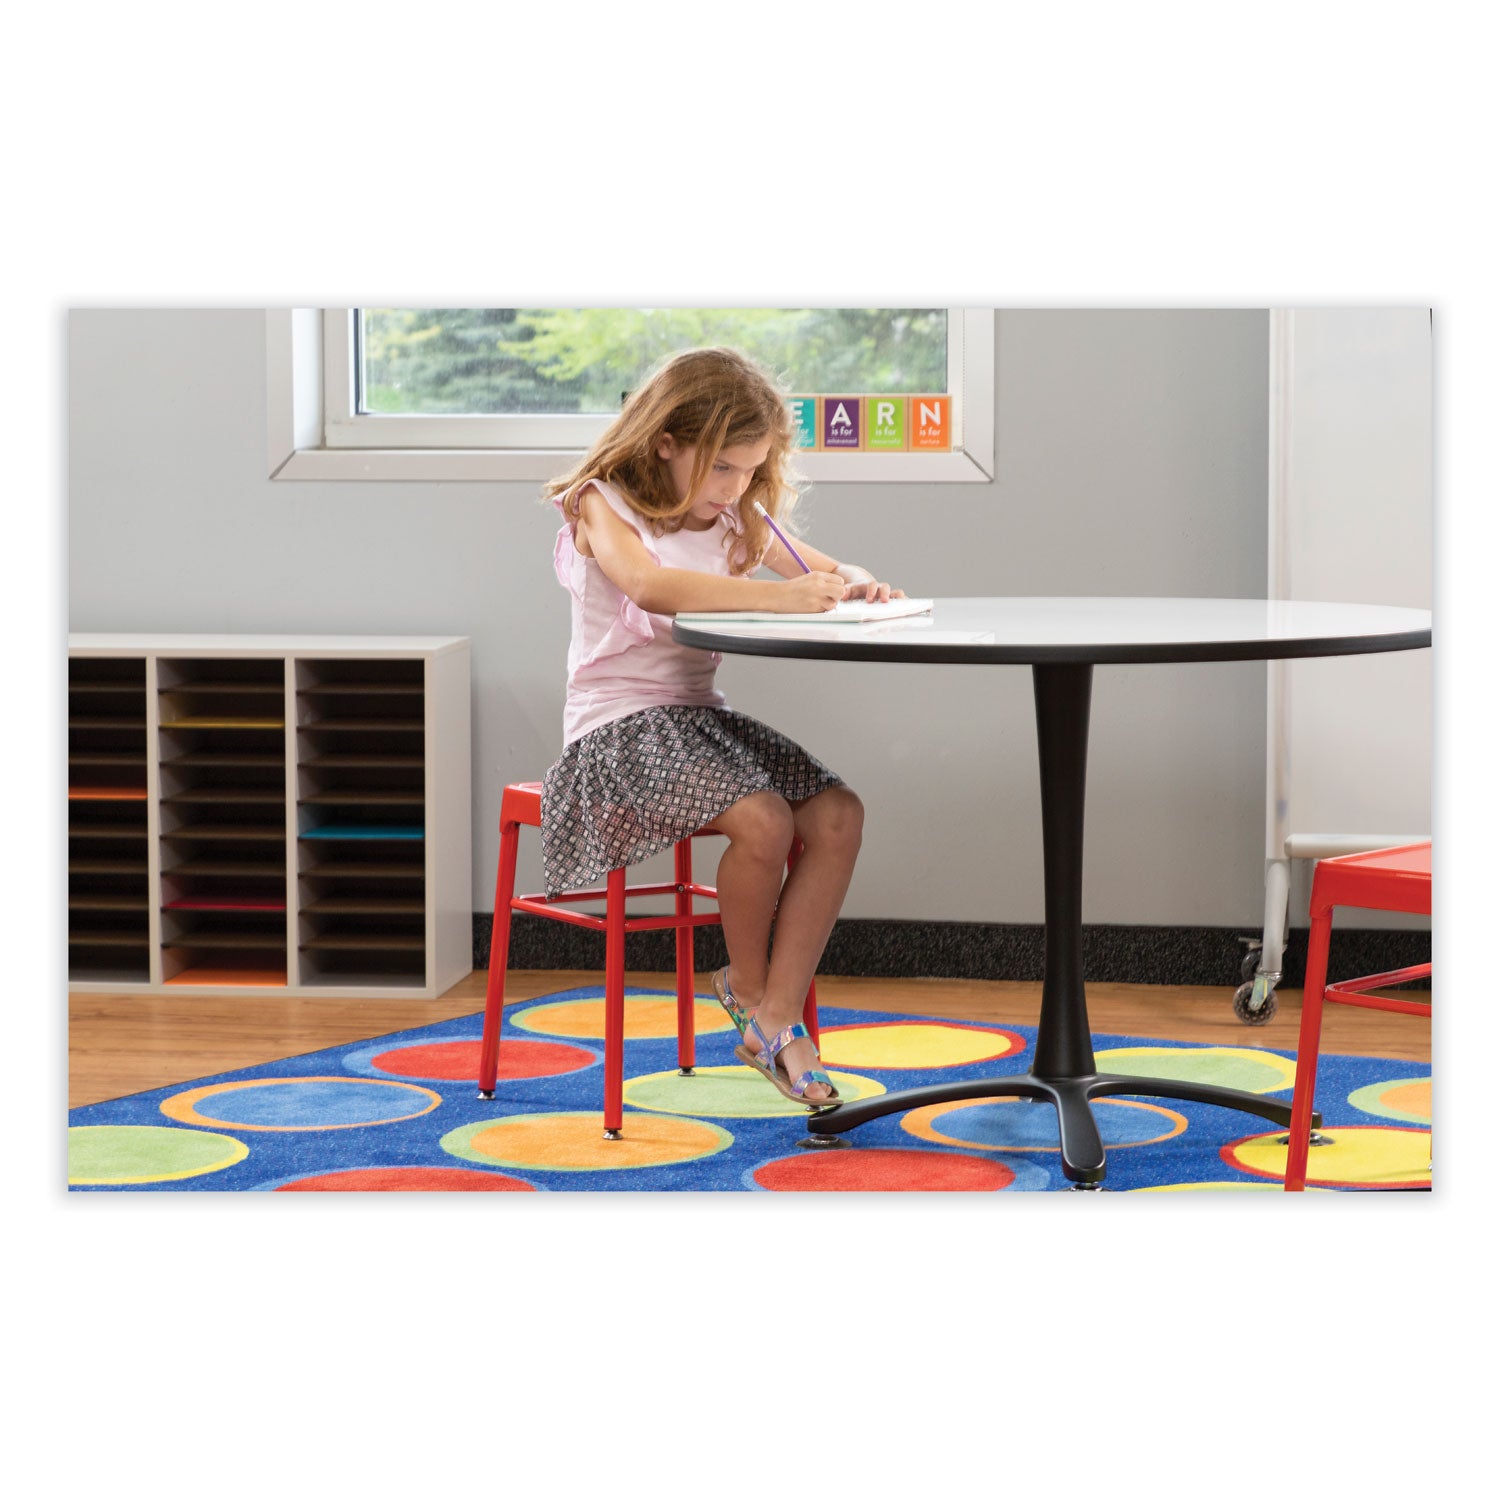 steel-guestbistro-stool-backless-supports-up-to-250-lb-18-seat-height-red-seat-red-base-ships-in-1-3-business-days_saf6604rd - 5